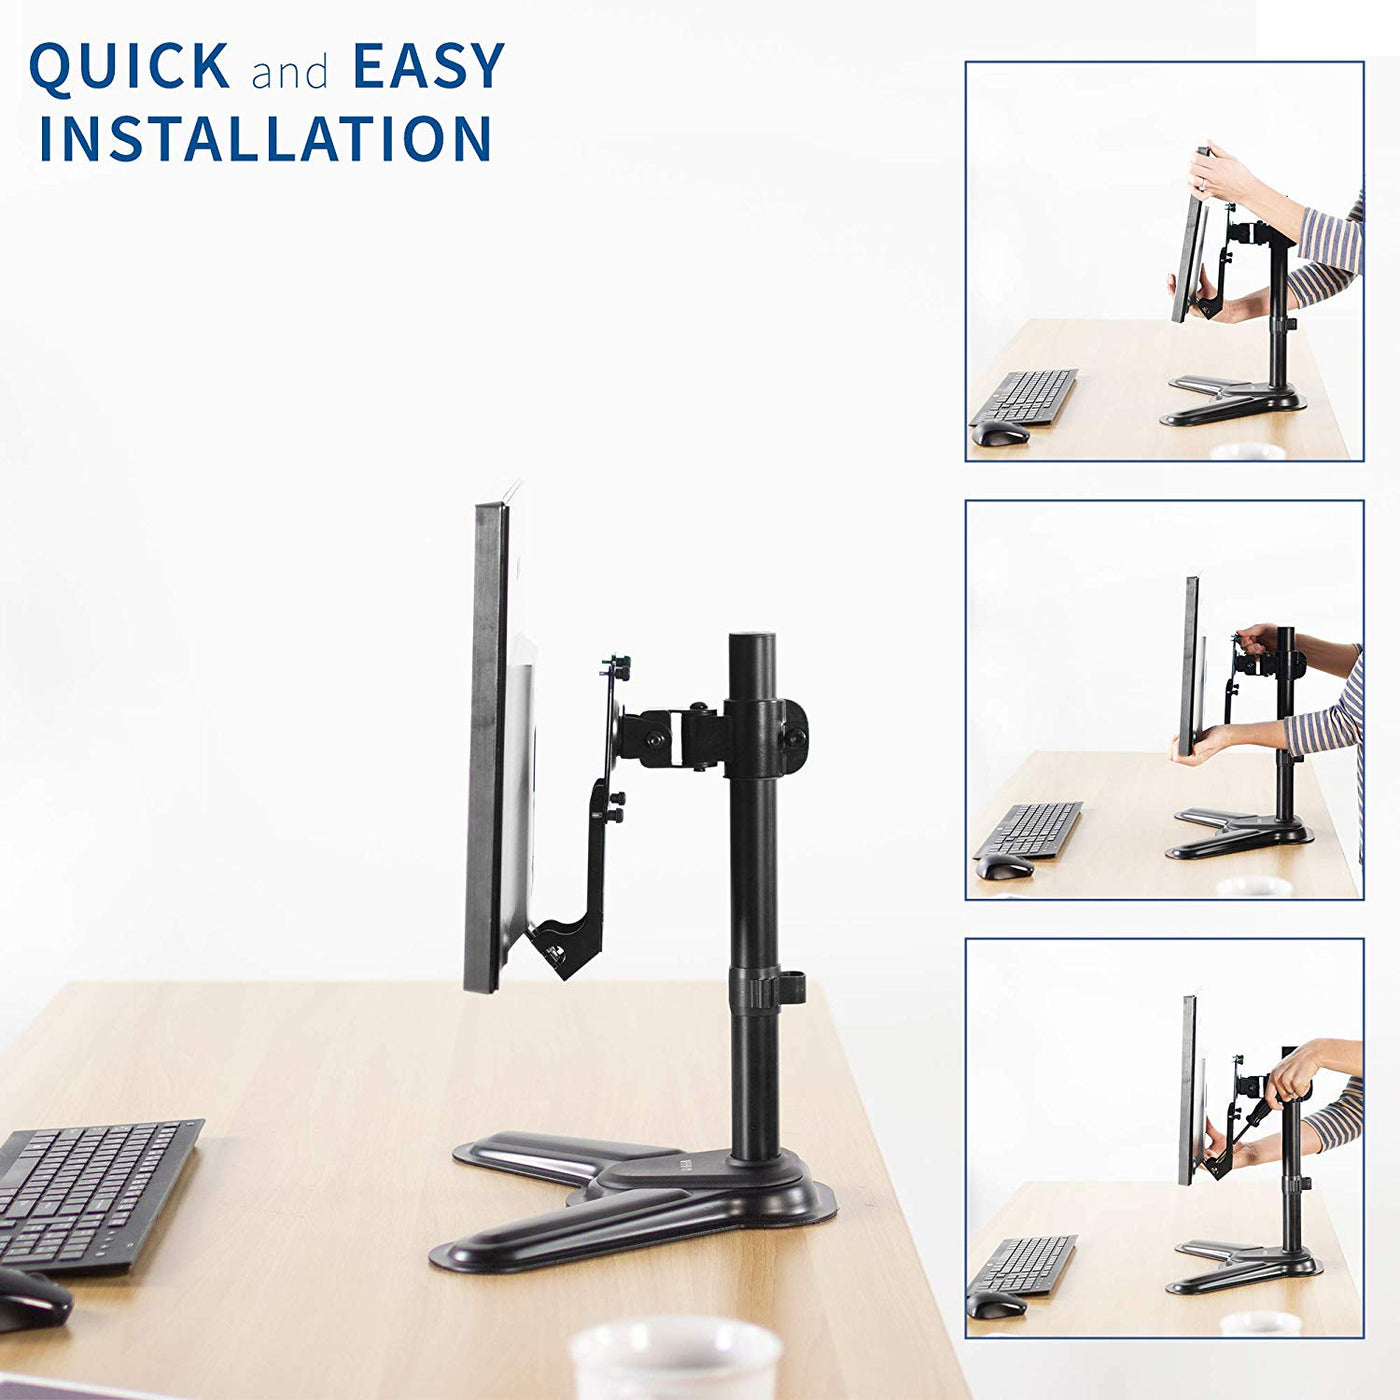 VESA Adapter for Compatible Samsung CF591 Series – VIVO - desk solutions,  screen mounting, and more